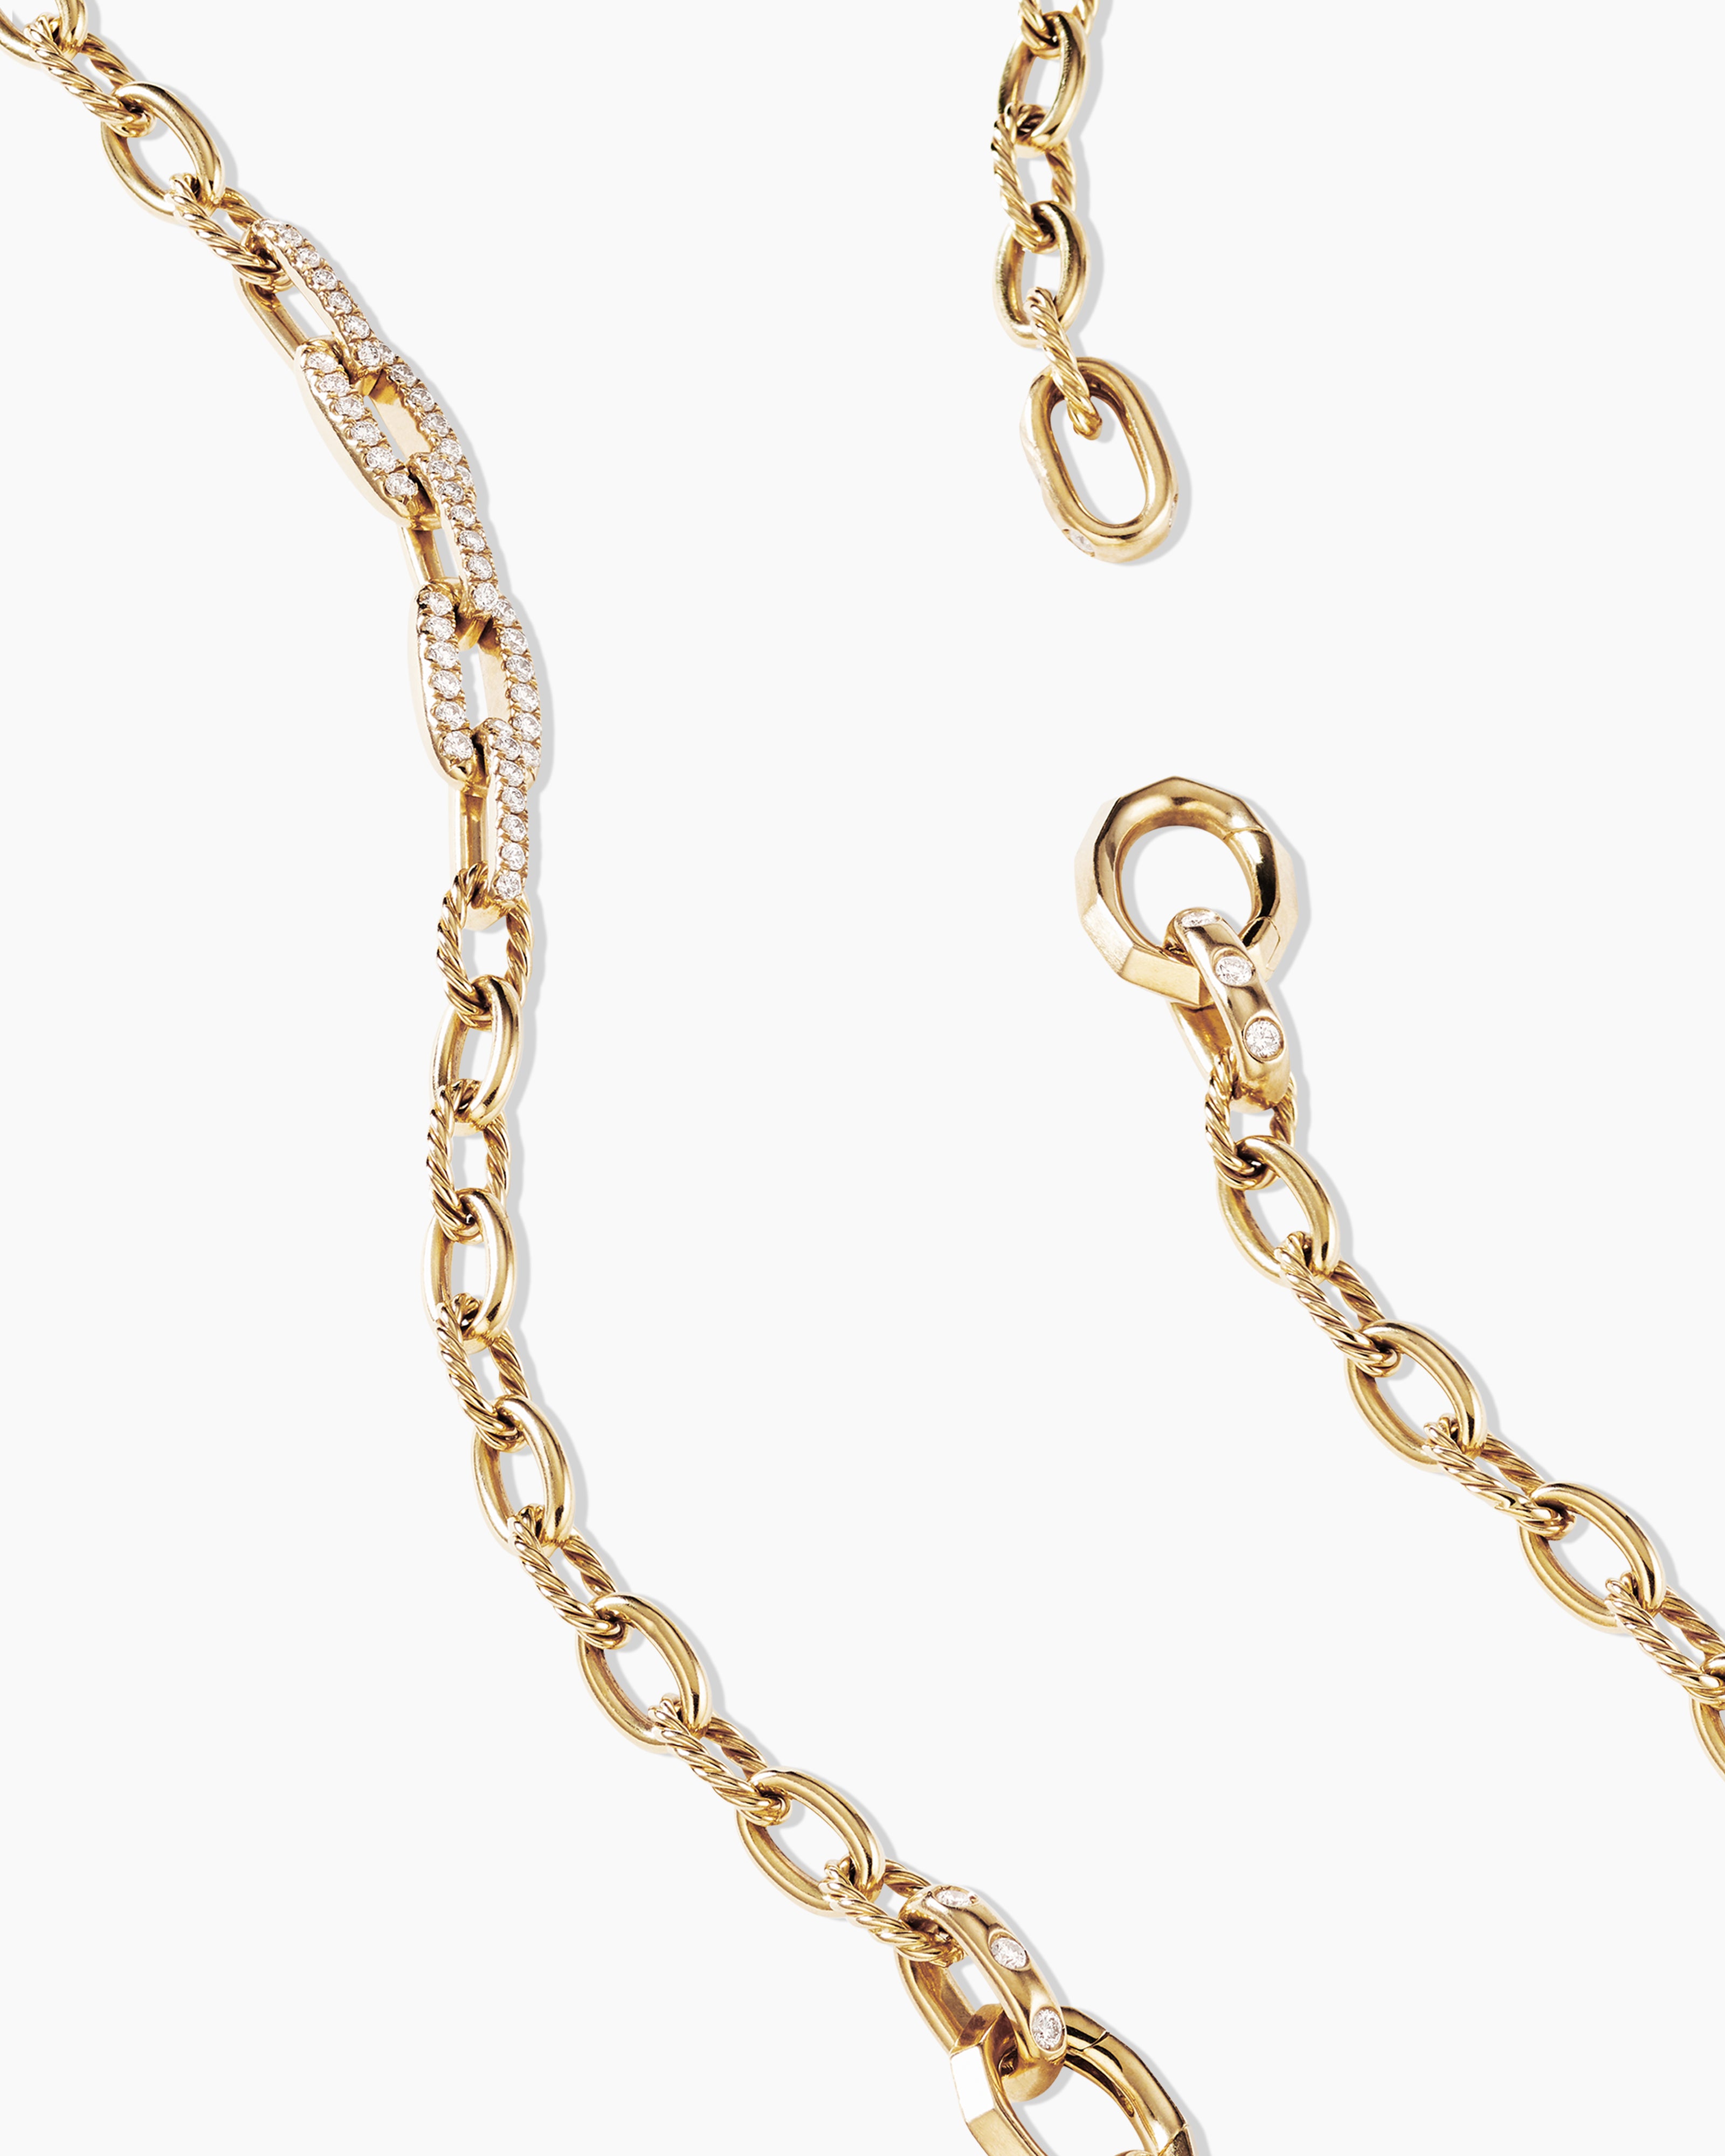 Stax Convertible Chain Necklace in 18K Yellow Gold with Diamonds, 5mm |  David Yurman